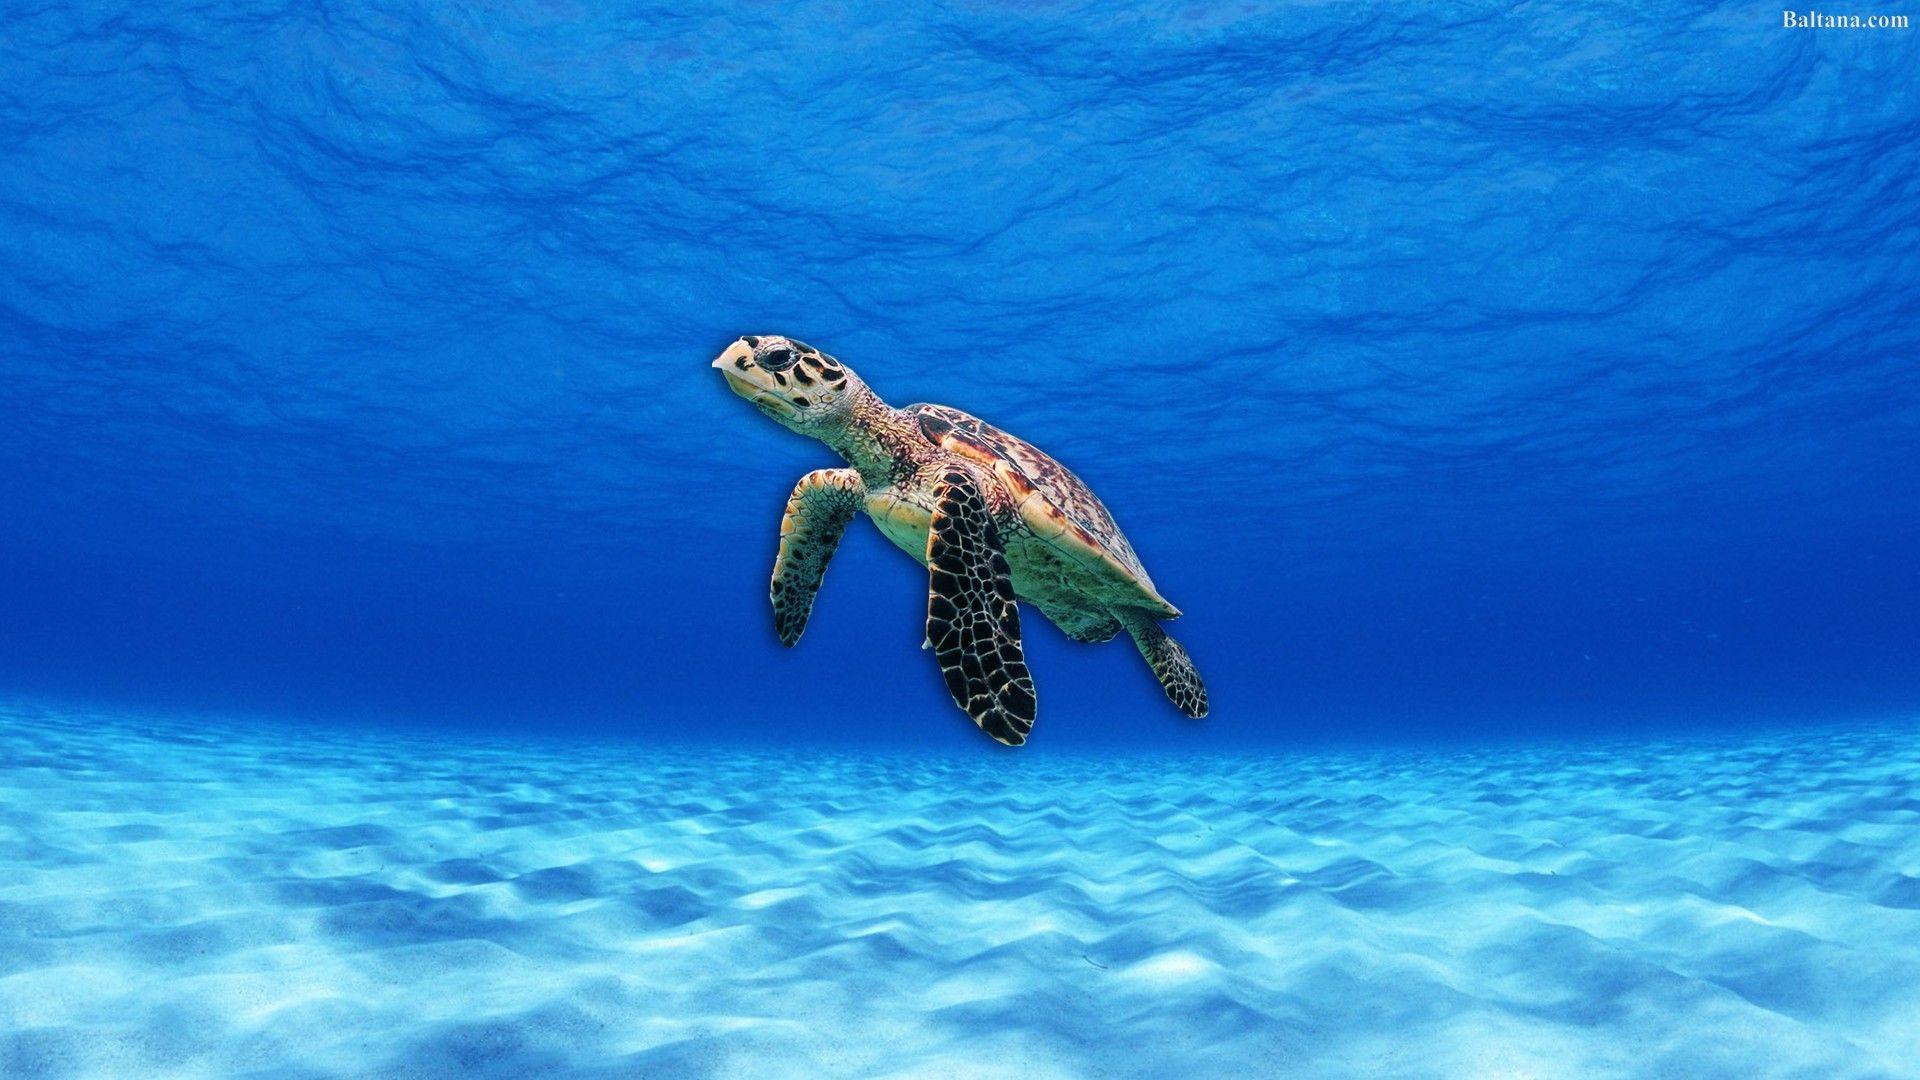 300+] Turtle Pictures | Wallpapers.com